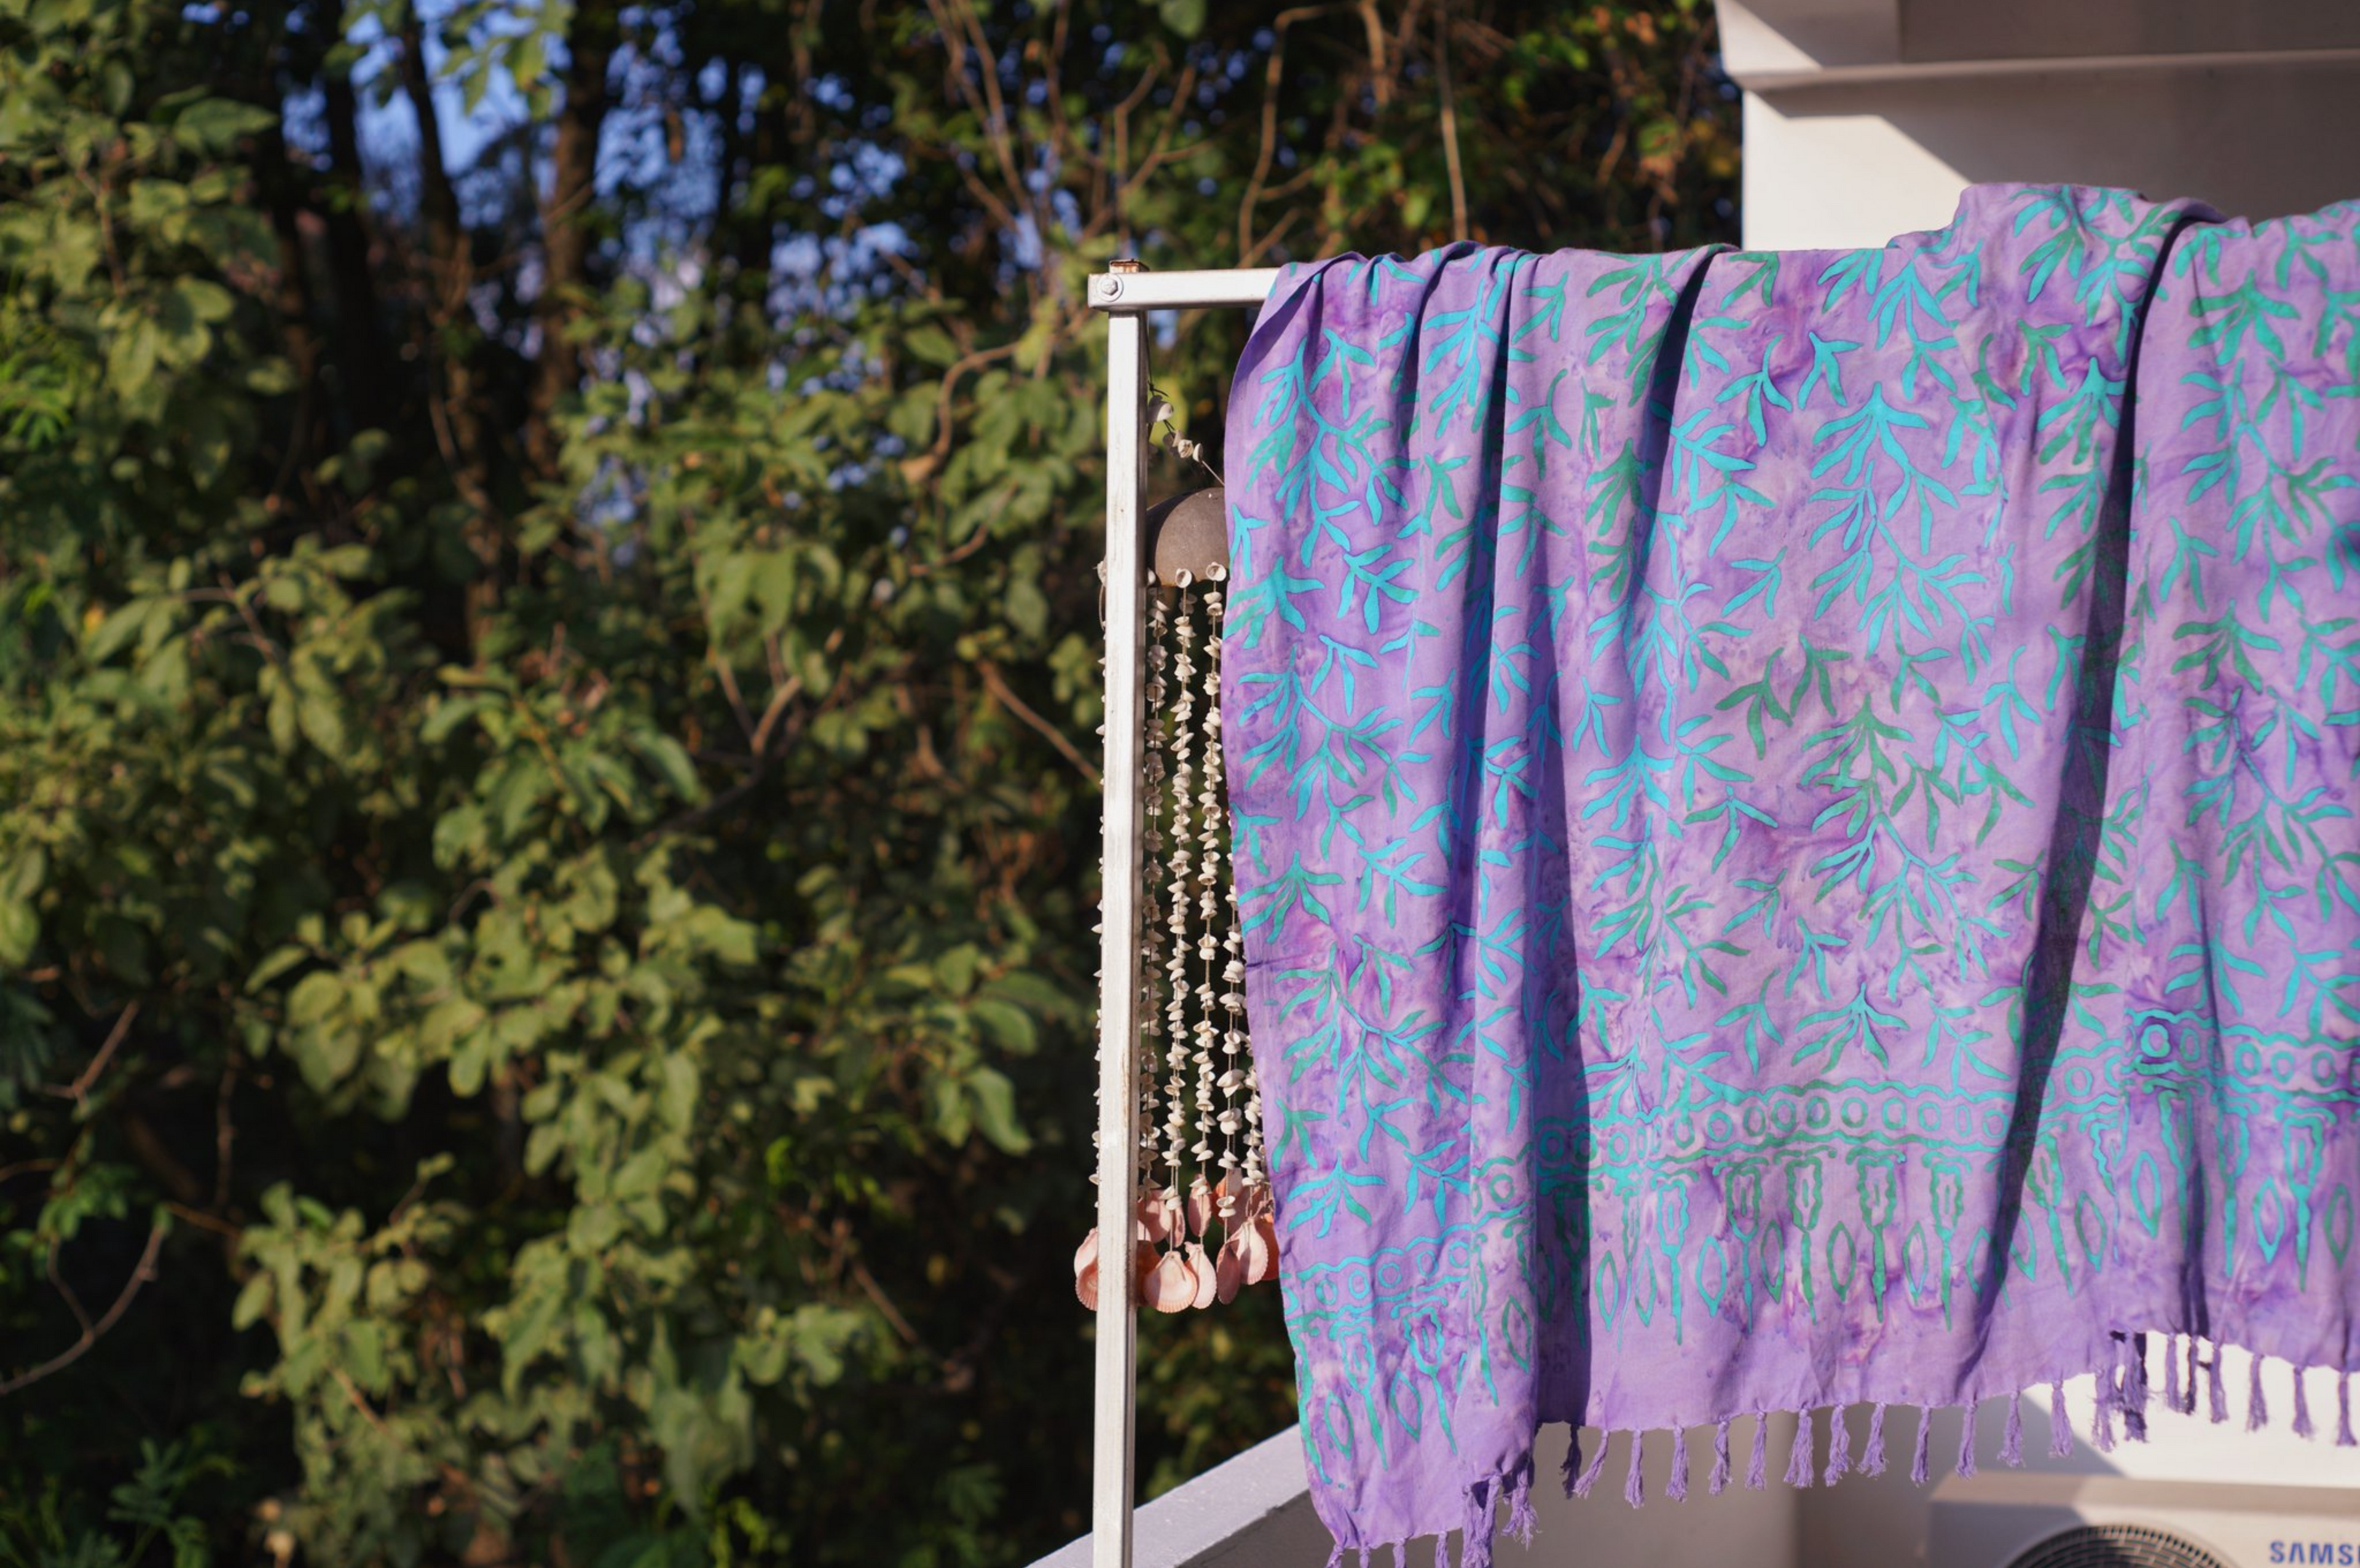 The Lanta Reef - Lavender sarong from YUMI & KORA hangs in the sunshine by some trees